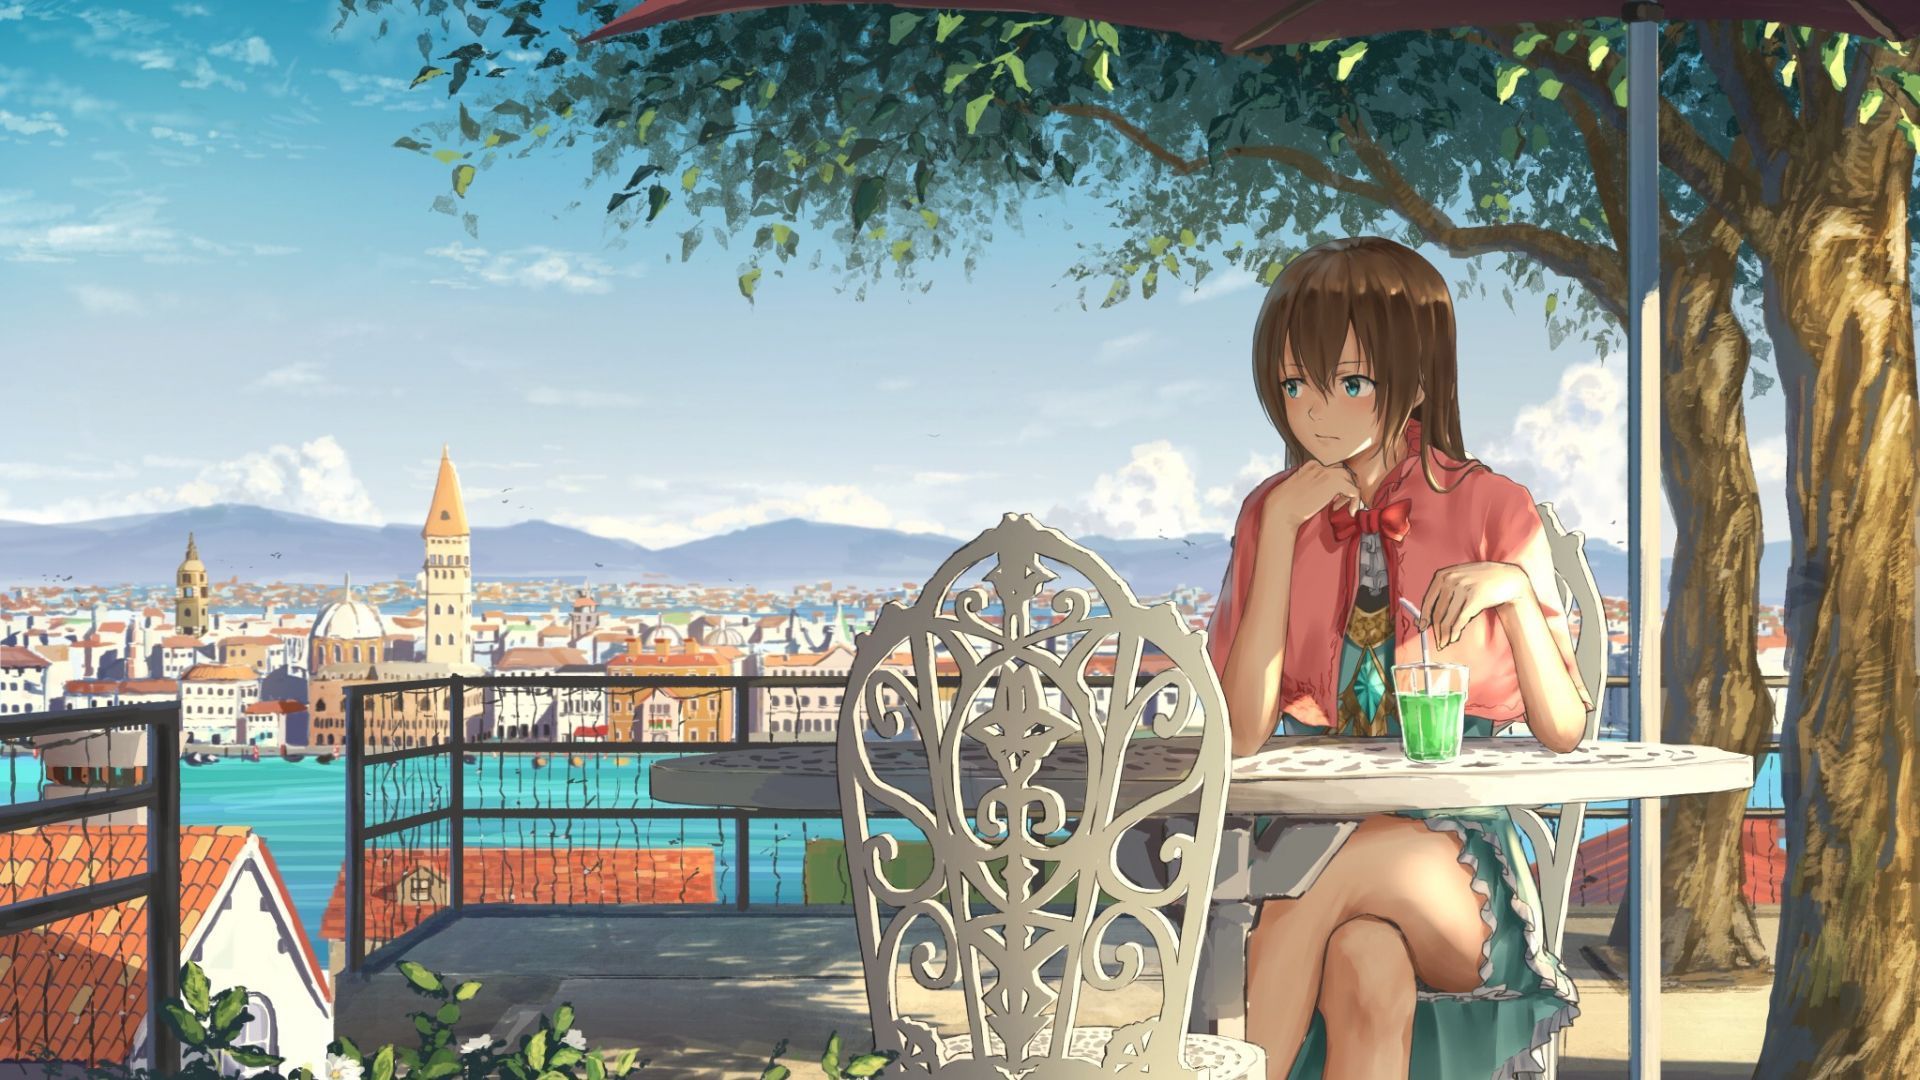 Desktop Wallpaper Cute Girl, Anime, Drinking, Summer, HD Image, Picture, Background, Afc036